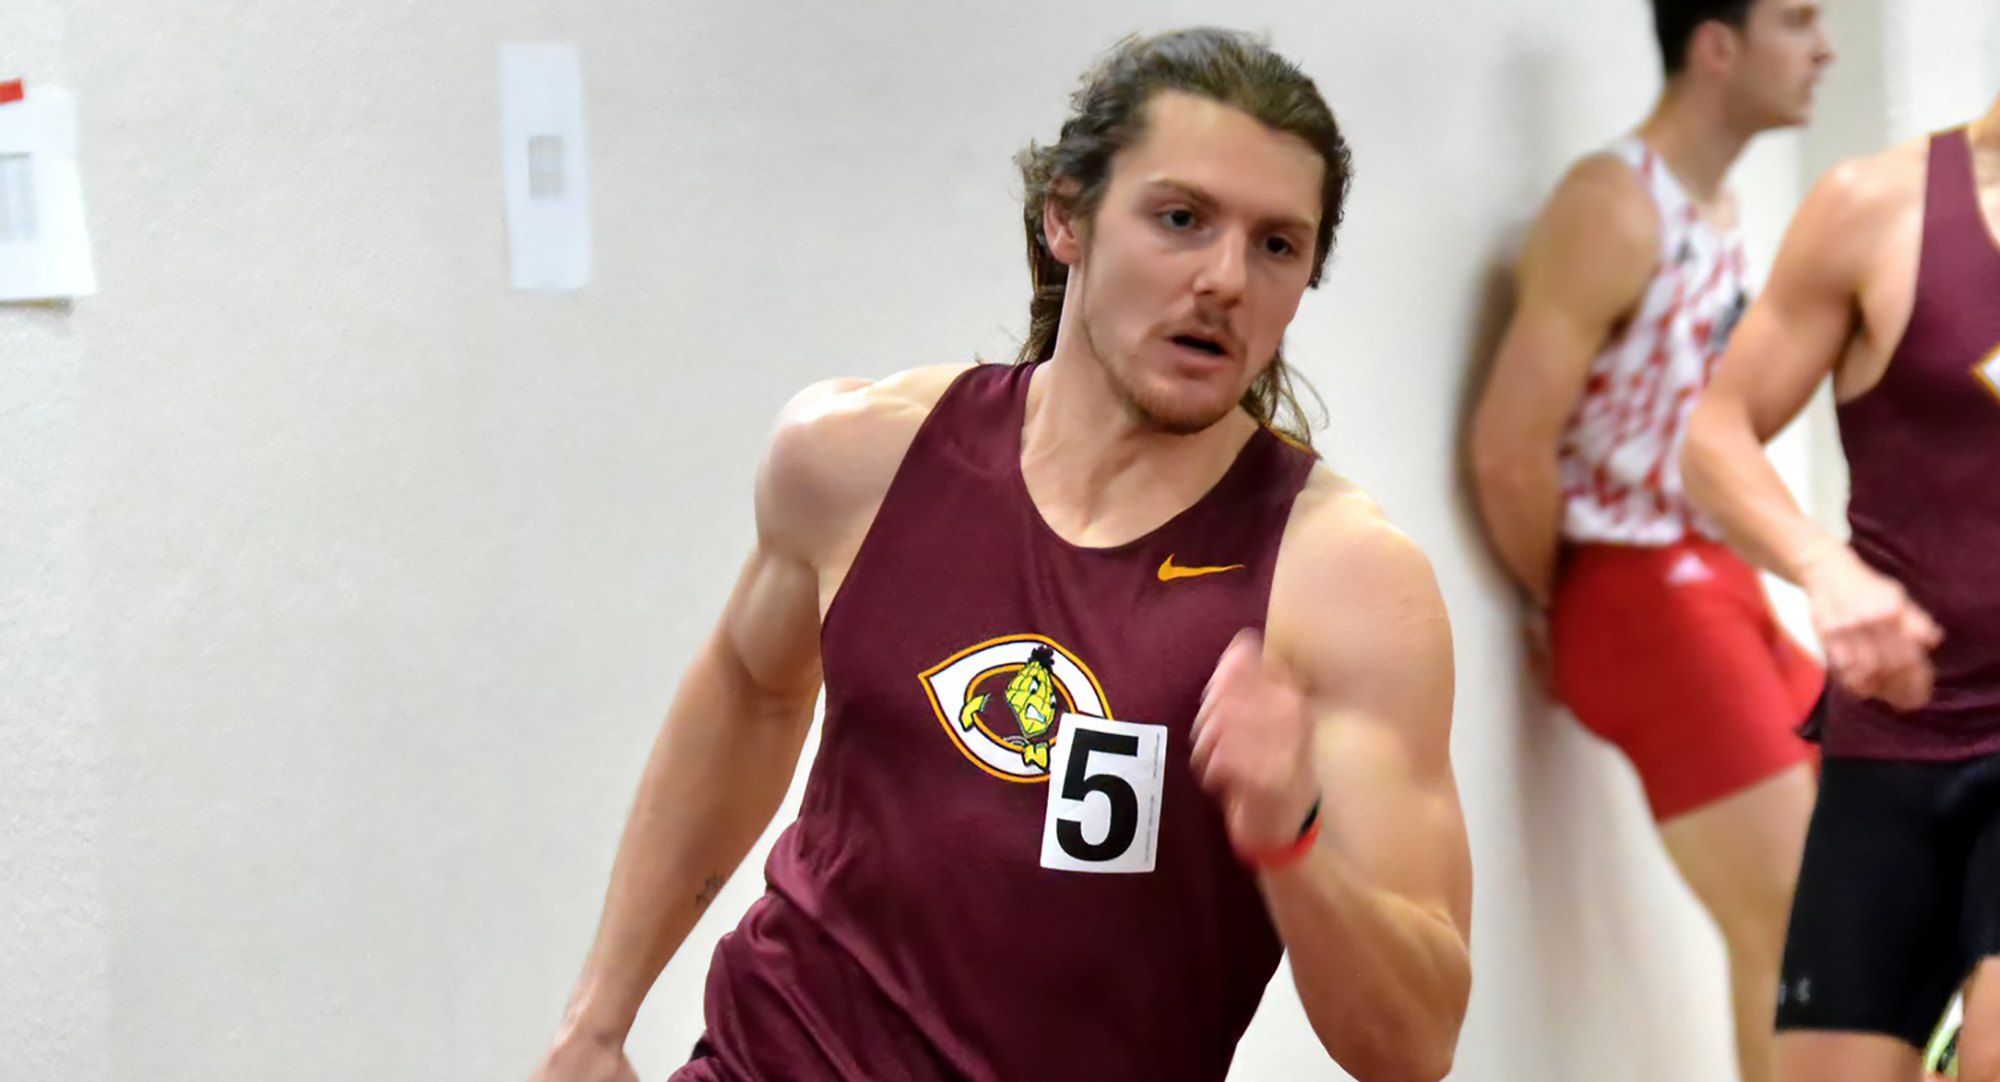 Hayden Gagnon ran a career-best 48.24 in the prelims of the 400 meters at the NCAA Meet and missed earning All-American honors by .05 of a second.